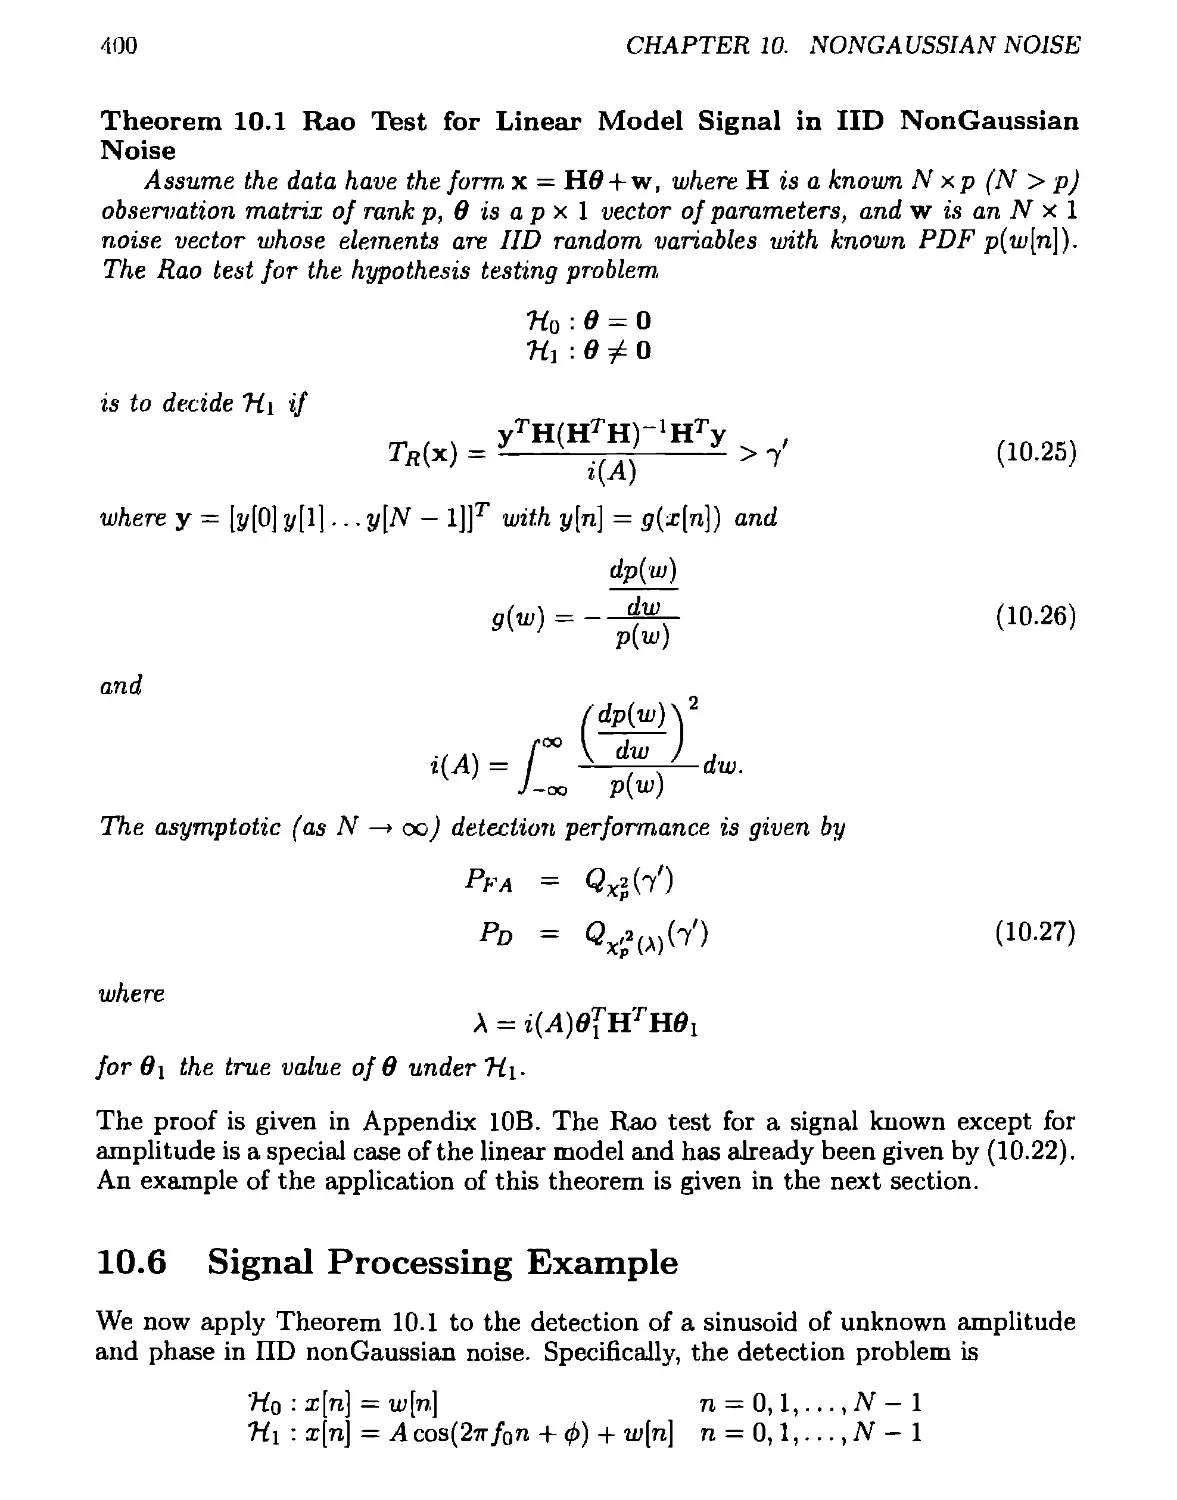 10.6 Signal Processing Example